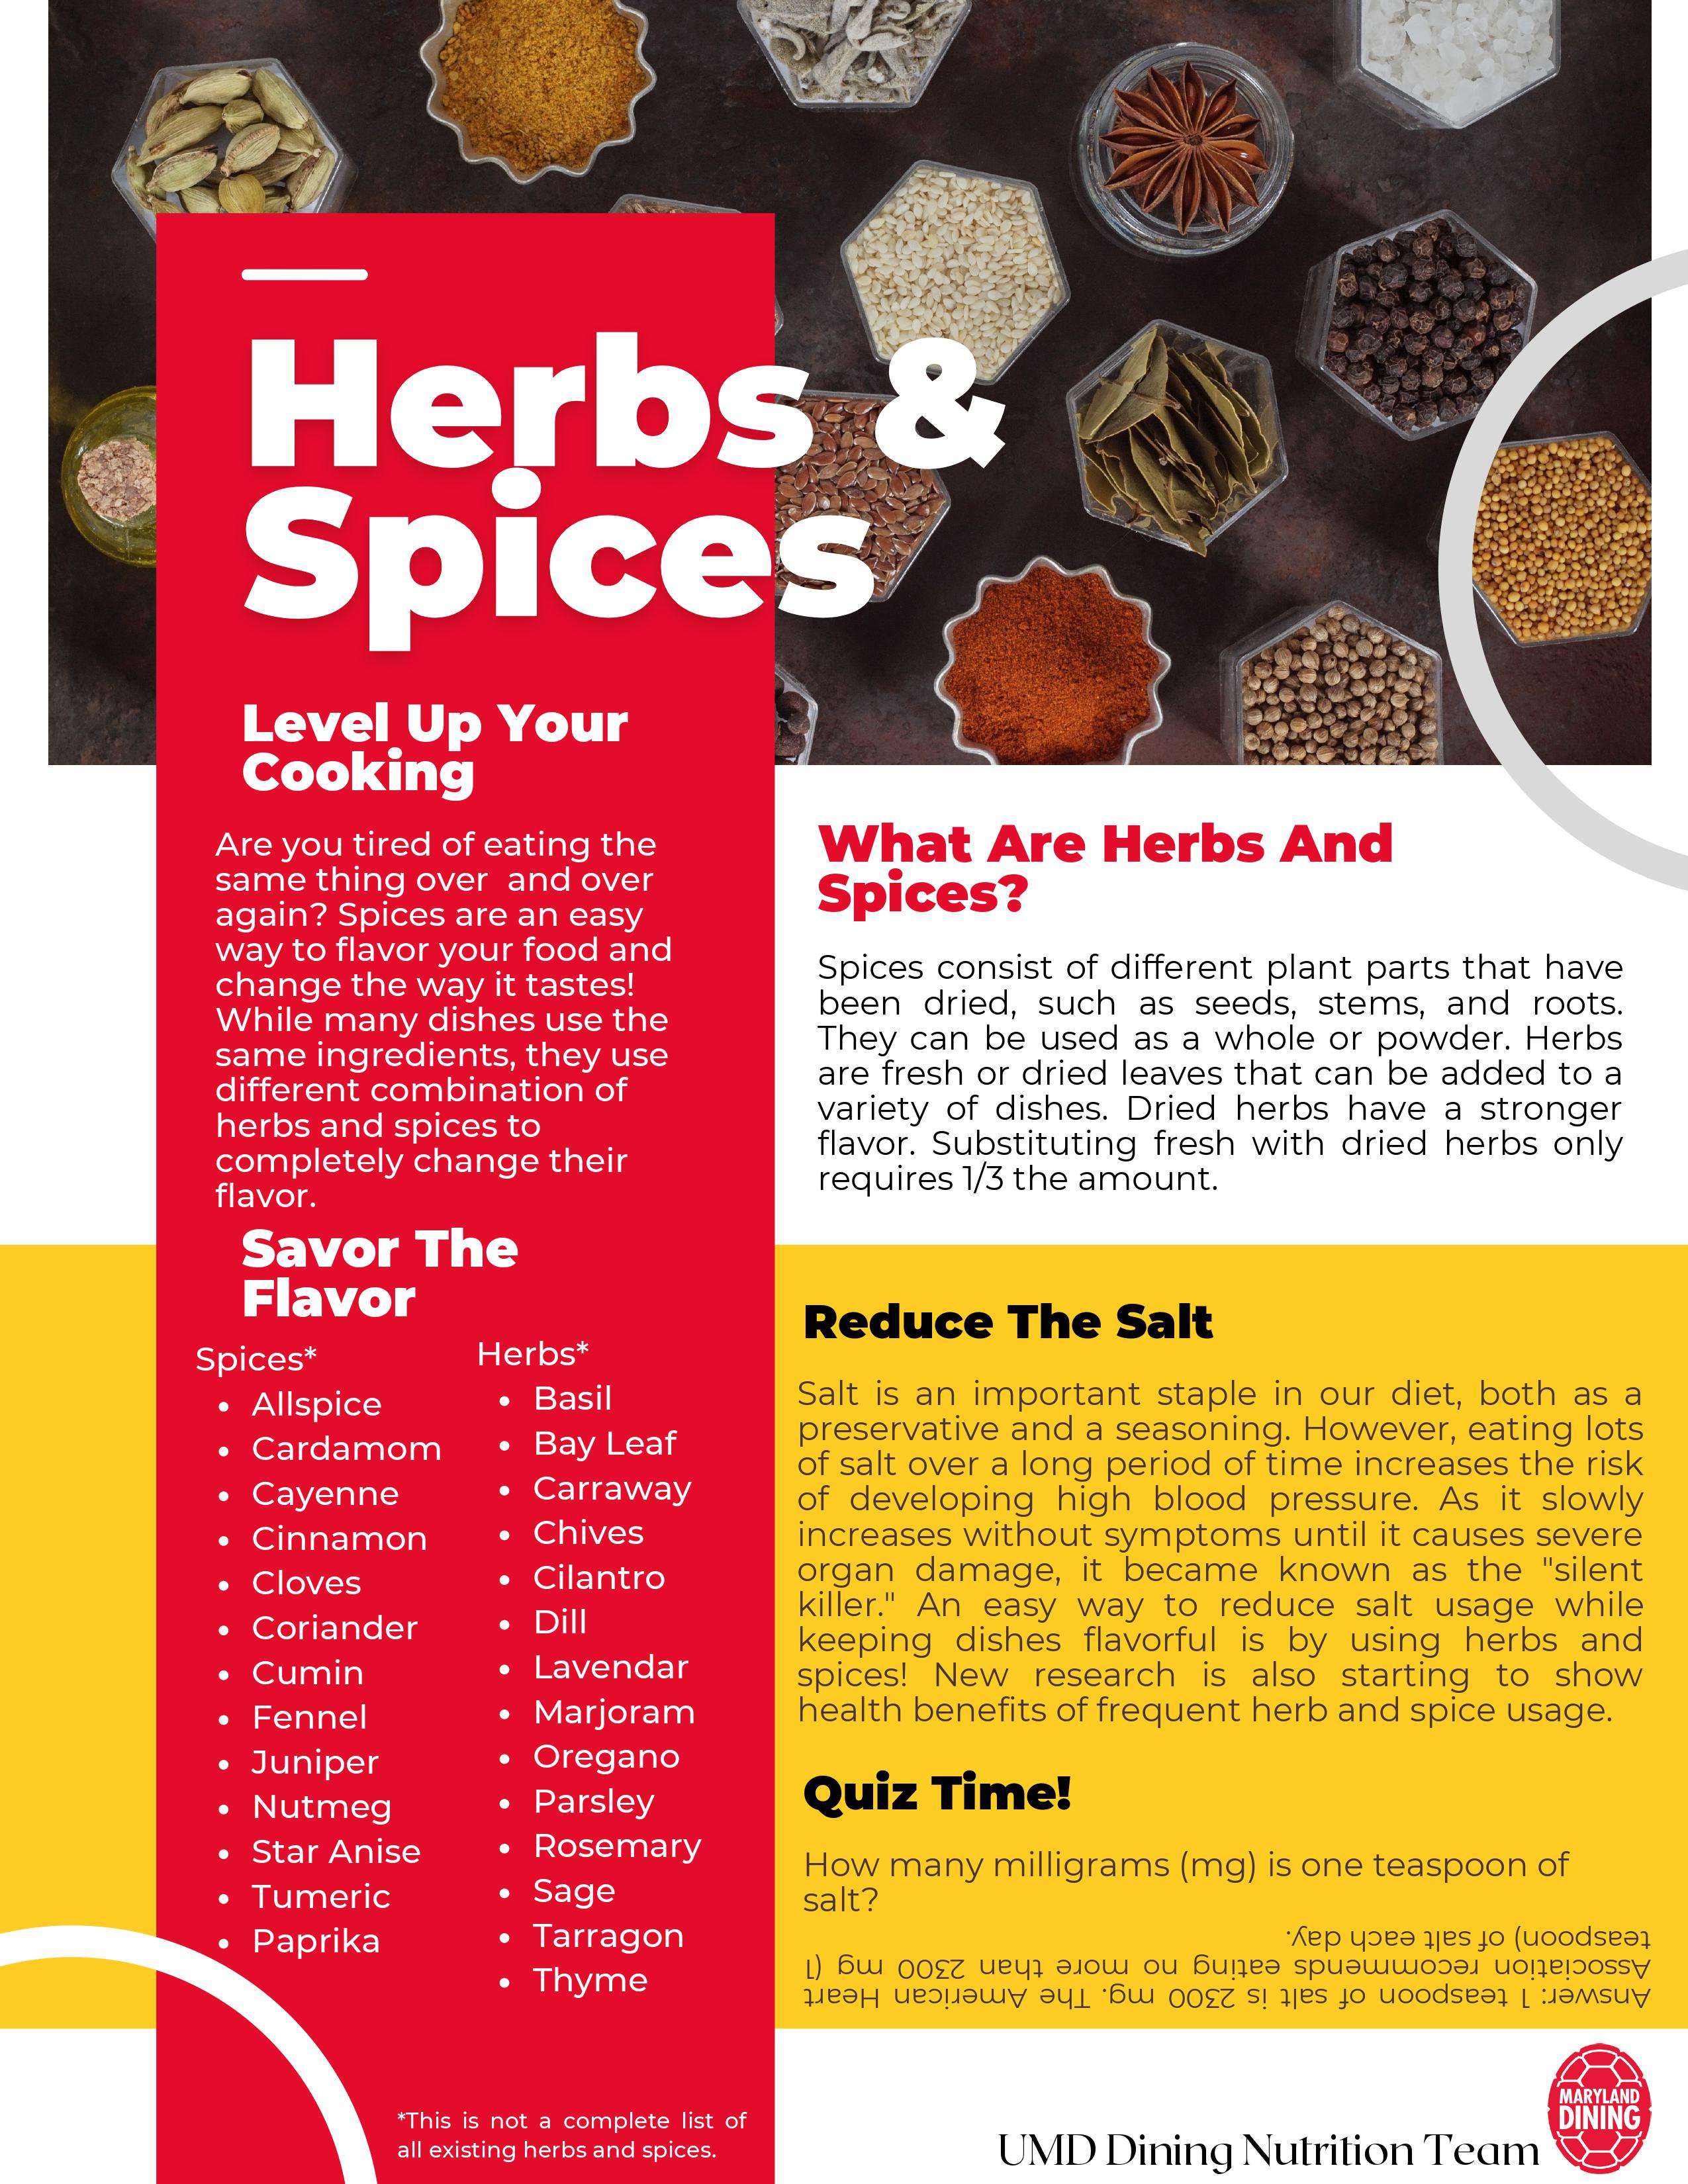 All about Herbs & Spices